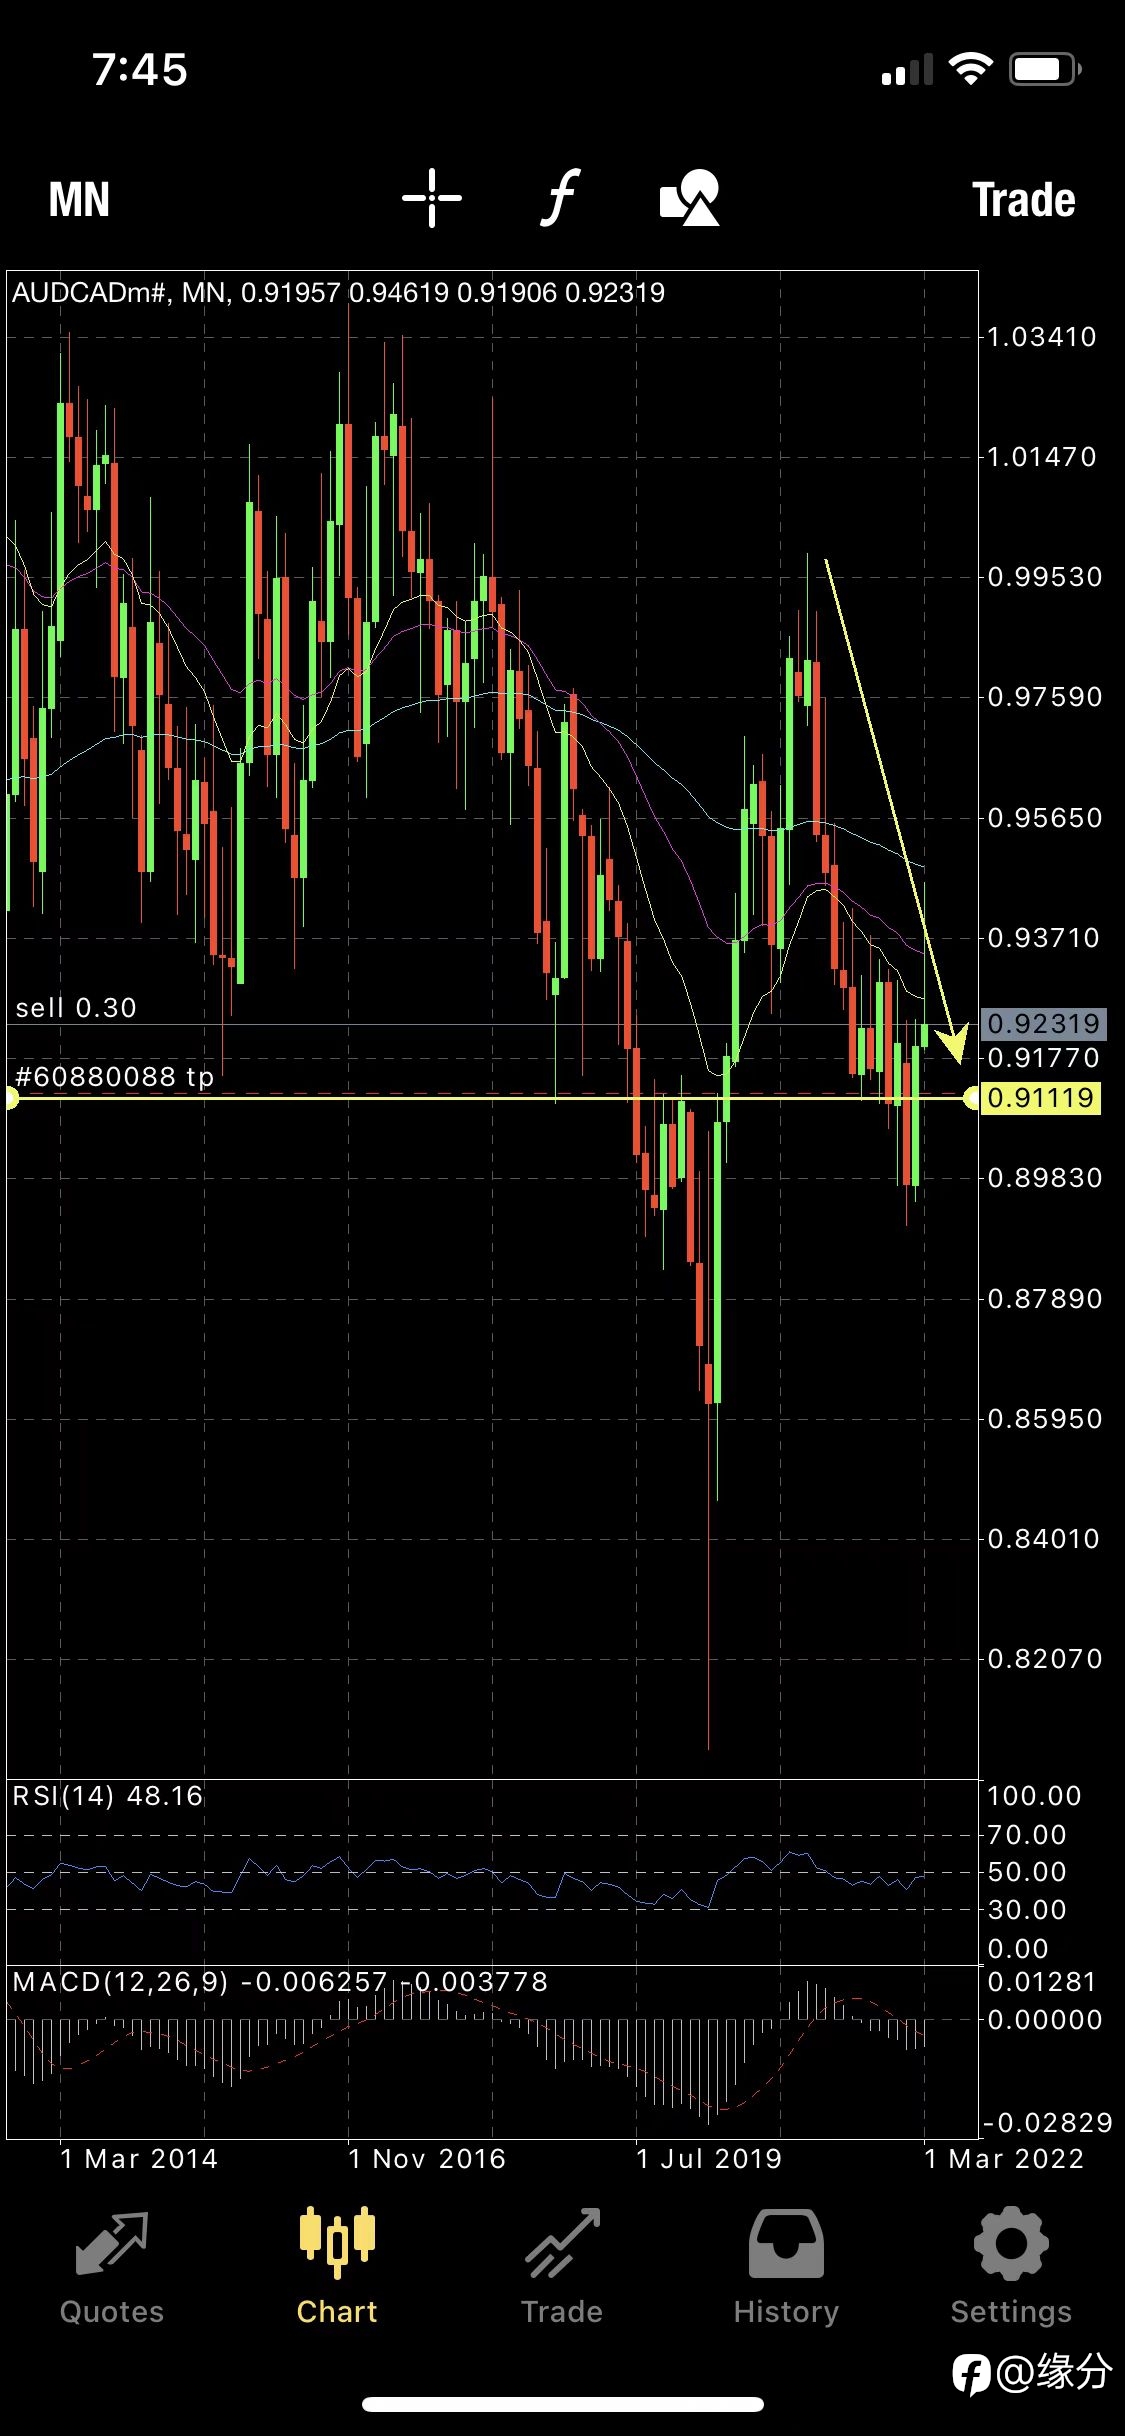 Sell AUDCAD until 0.9120